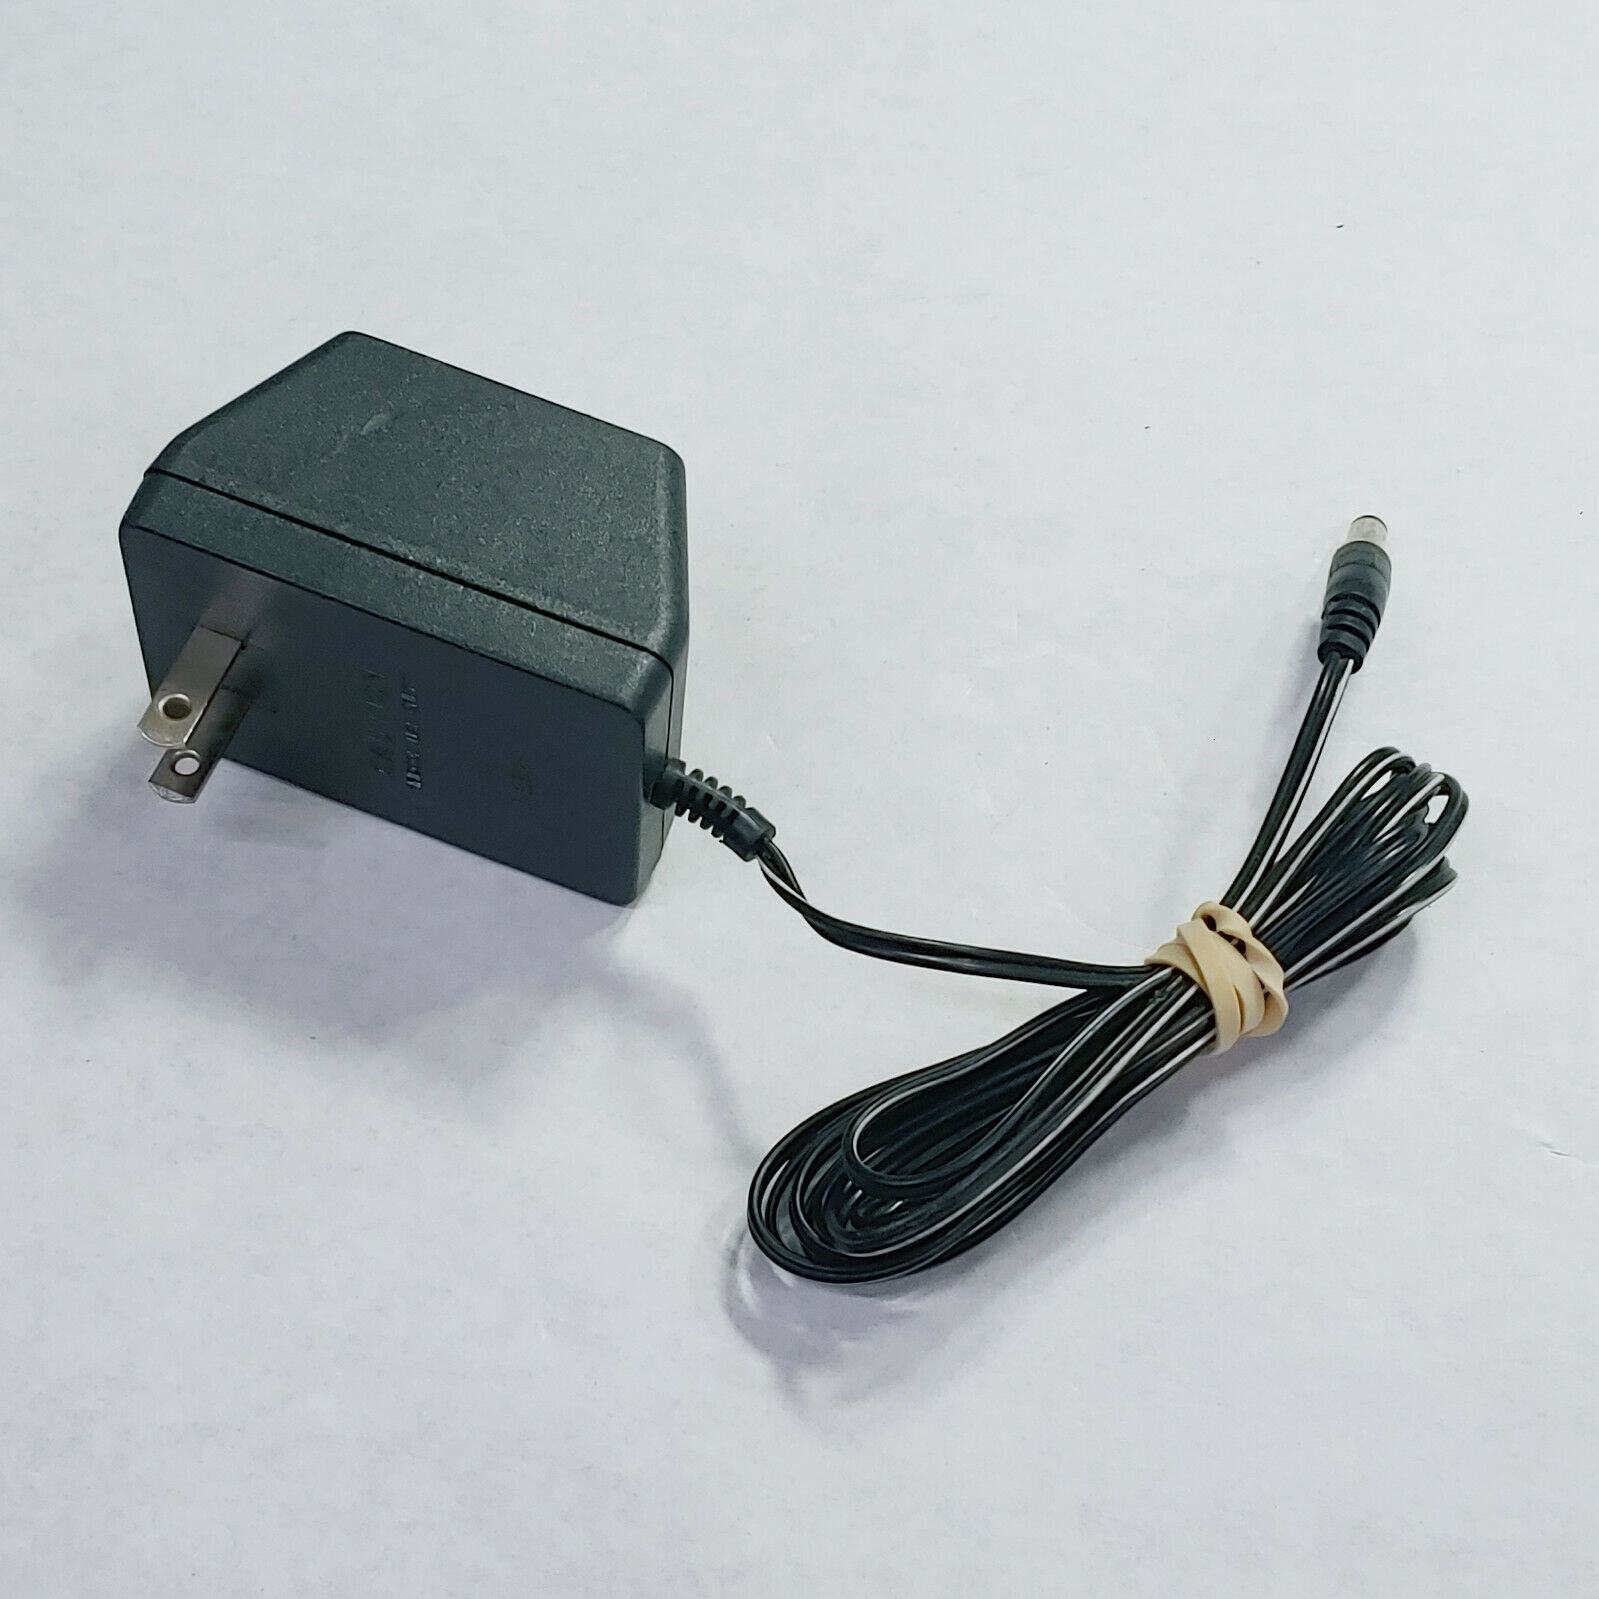 Leapster Leapfrog 690-10590 Toy Transformer AC Adapter Charger 13V 700ma Type: AC/AC Adapter Conne